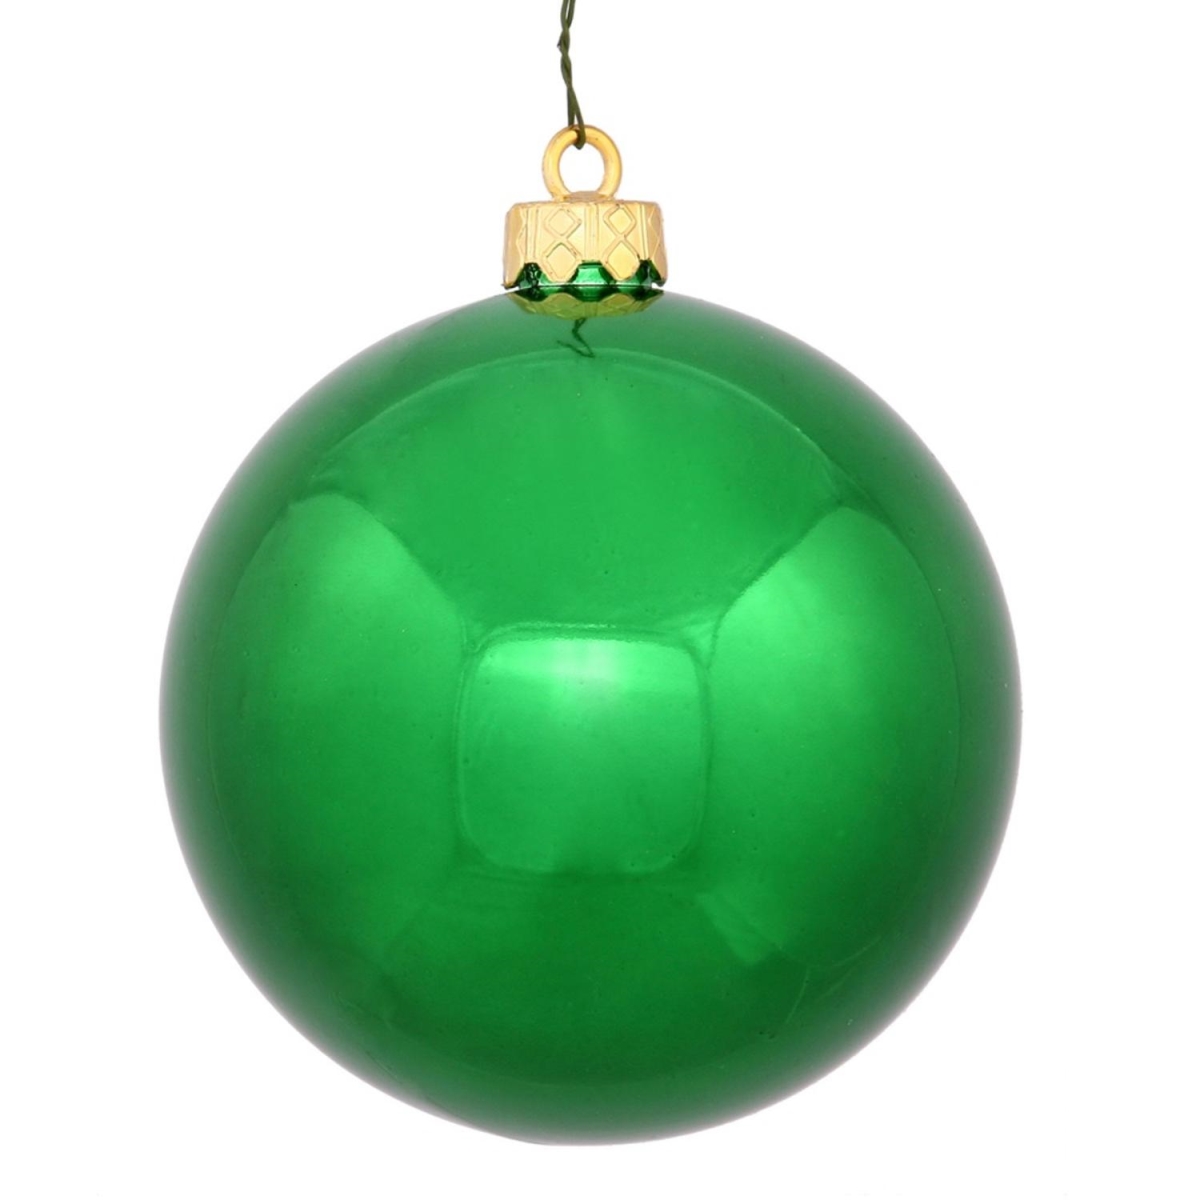 31749317 Shiny Green Uv Resistant Commercial Drilled Shatterproof Christmas Ball Ornament - 2.75 In.